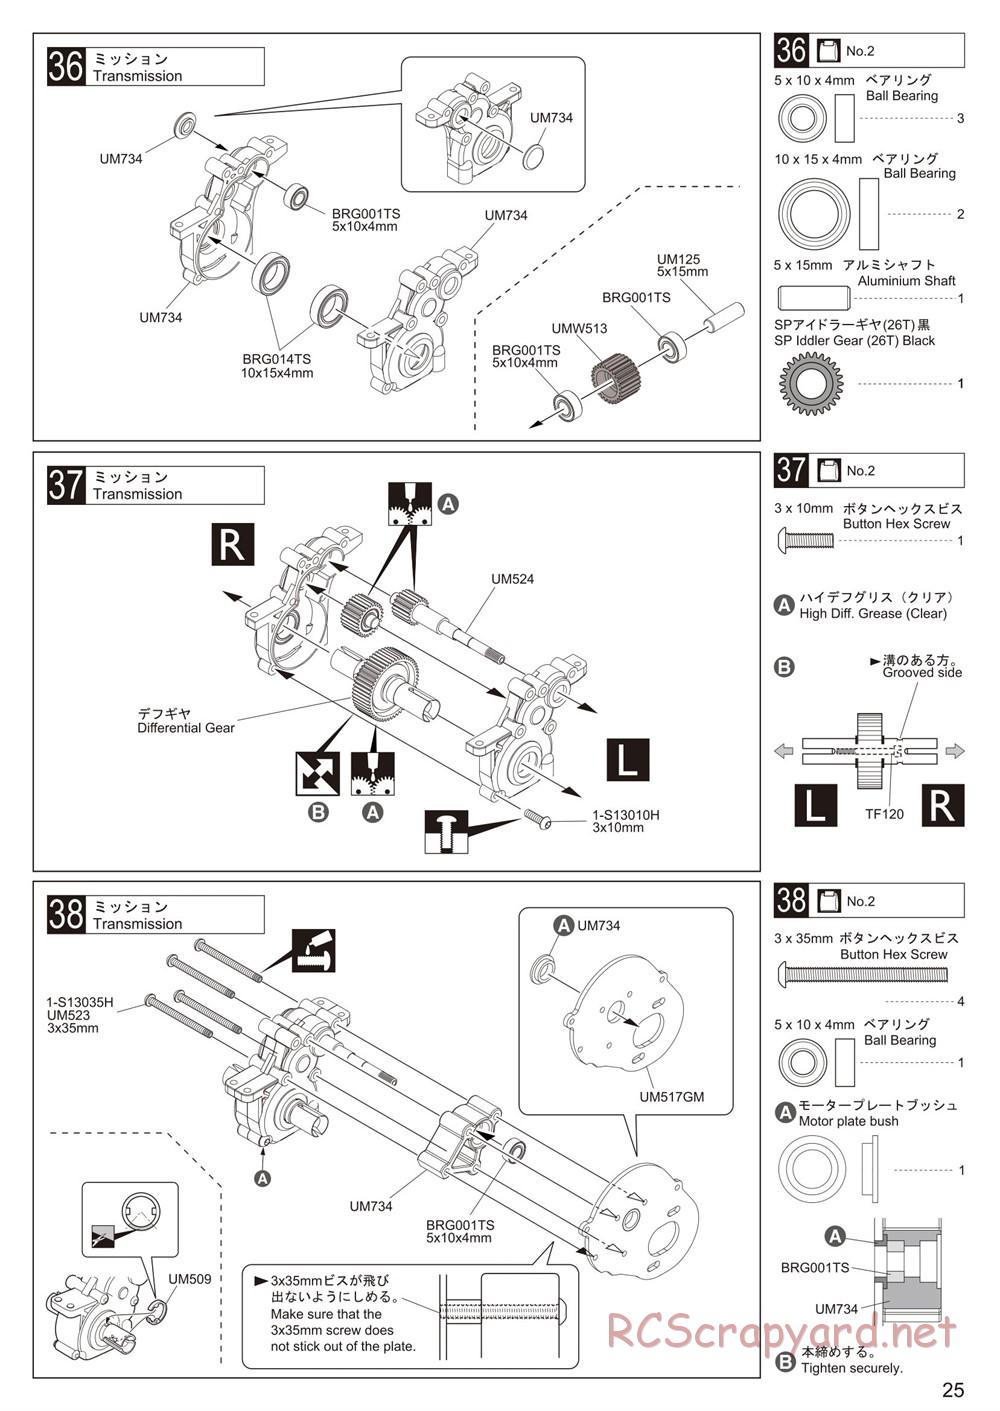 Kyosho - Ultima RB6.6 - Manual - Page 25